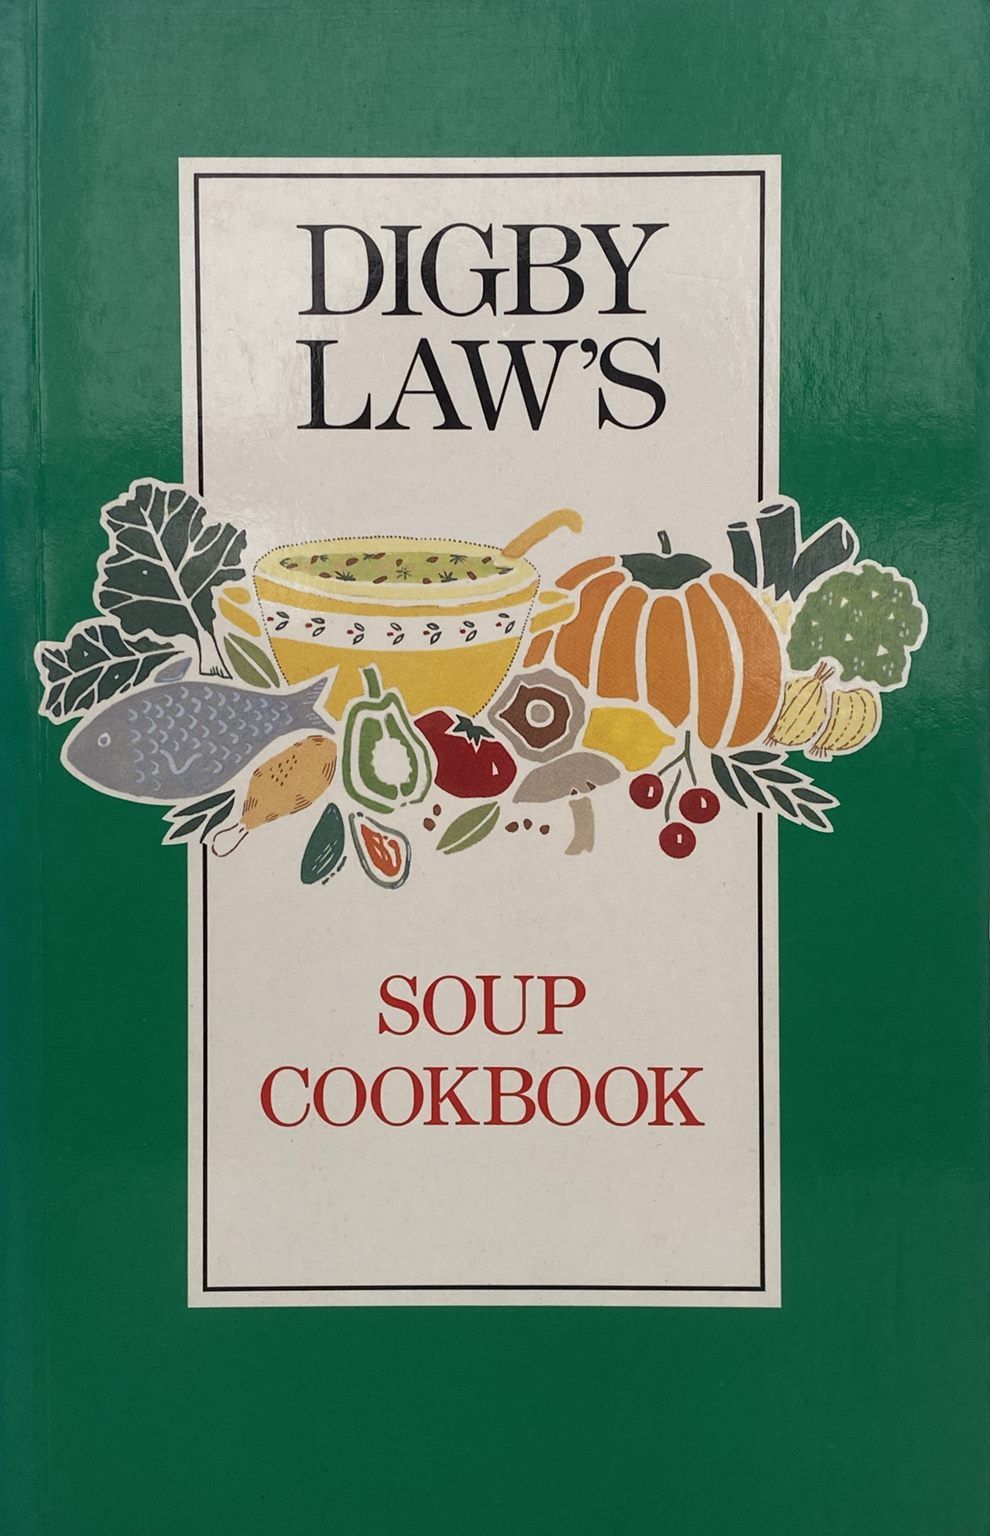 DIGBY LAW'S Soup Cookbook